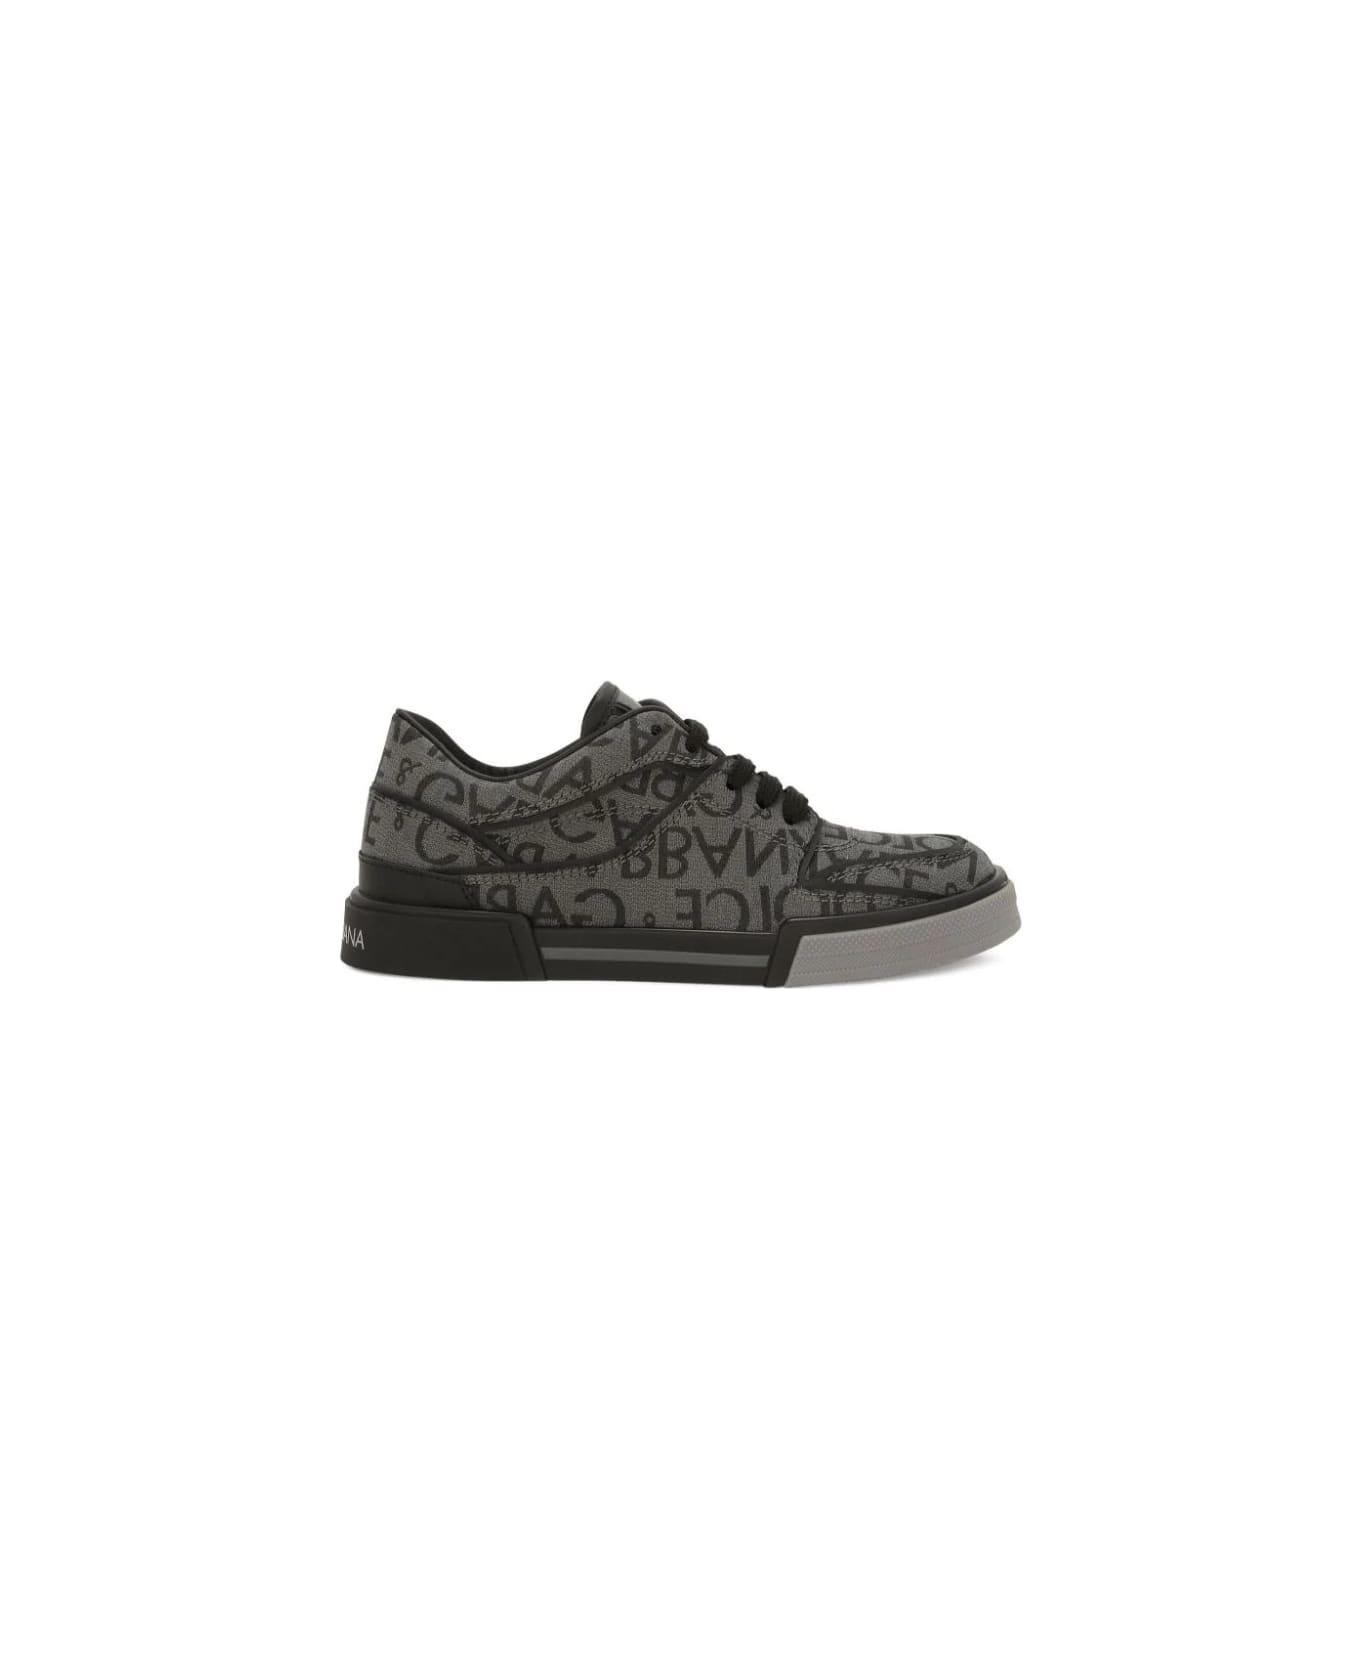 Dolce & Gabbana Grey New Roma Sneakers In Calf Leather - Grey